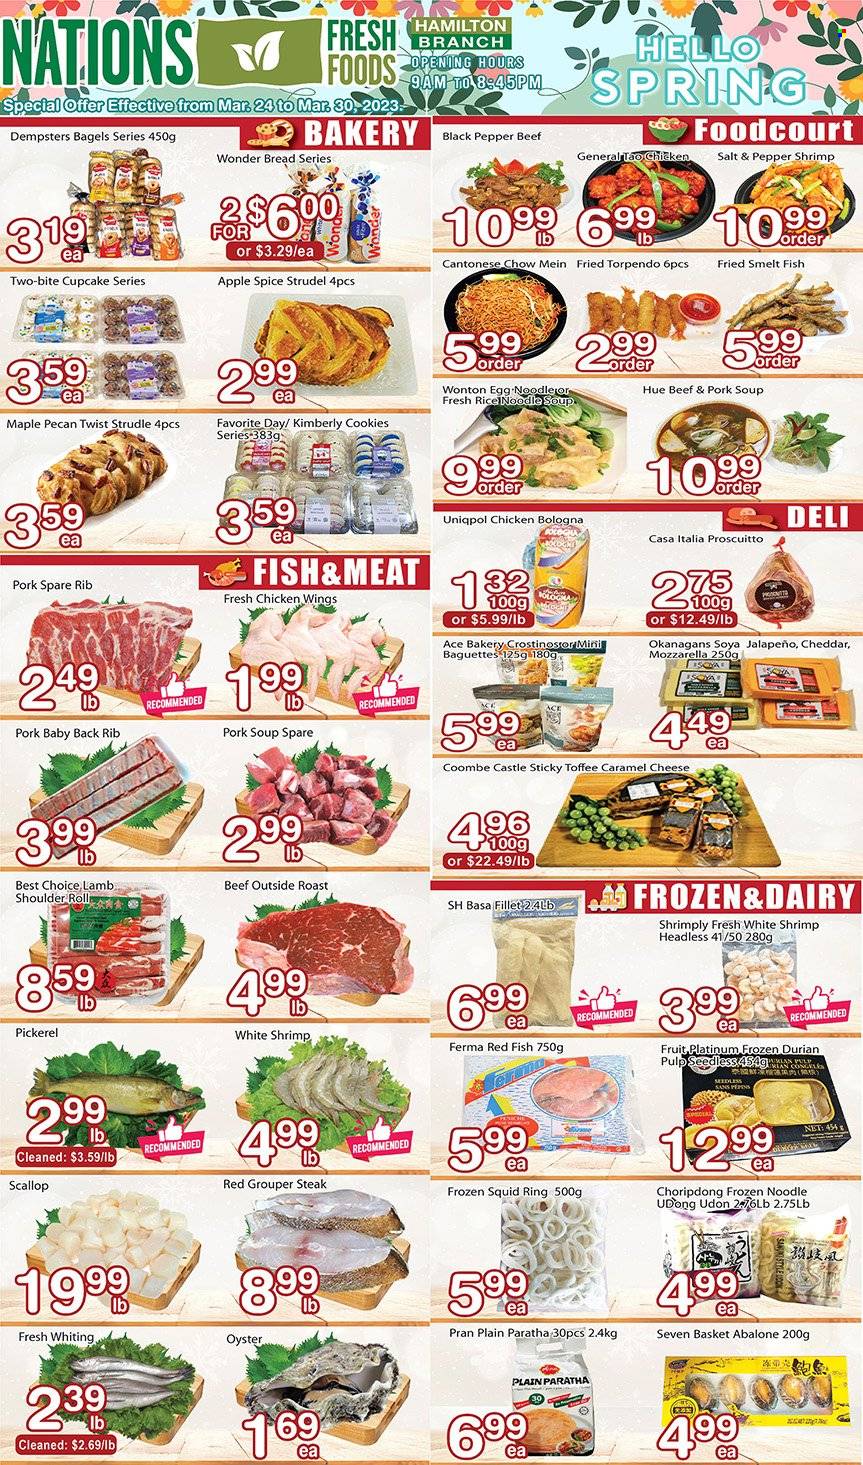 thumbnail - Nations Fresh Foods Flyer - March 24, 2023 - March 30, 2023 - Sales products - bagels, bread, strudel, ACE Bakery, cupcake, jalapeño, grouper, scallops, squid, oysters, fish, shrimps, abalone, whiting, squid rings, walleye, soup, noodles cup, noodles, roast, bologna sausage, cheddar, eggs, chicken wings, cookies, toffee, rice, black pepper, spice, caramel, Castle, chicken, steak, pork meat, pork ribs, pork back ribs, lamb meat, lamb shoulder, baguette, mozzarella. Page 2.